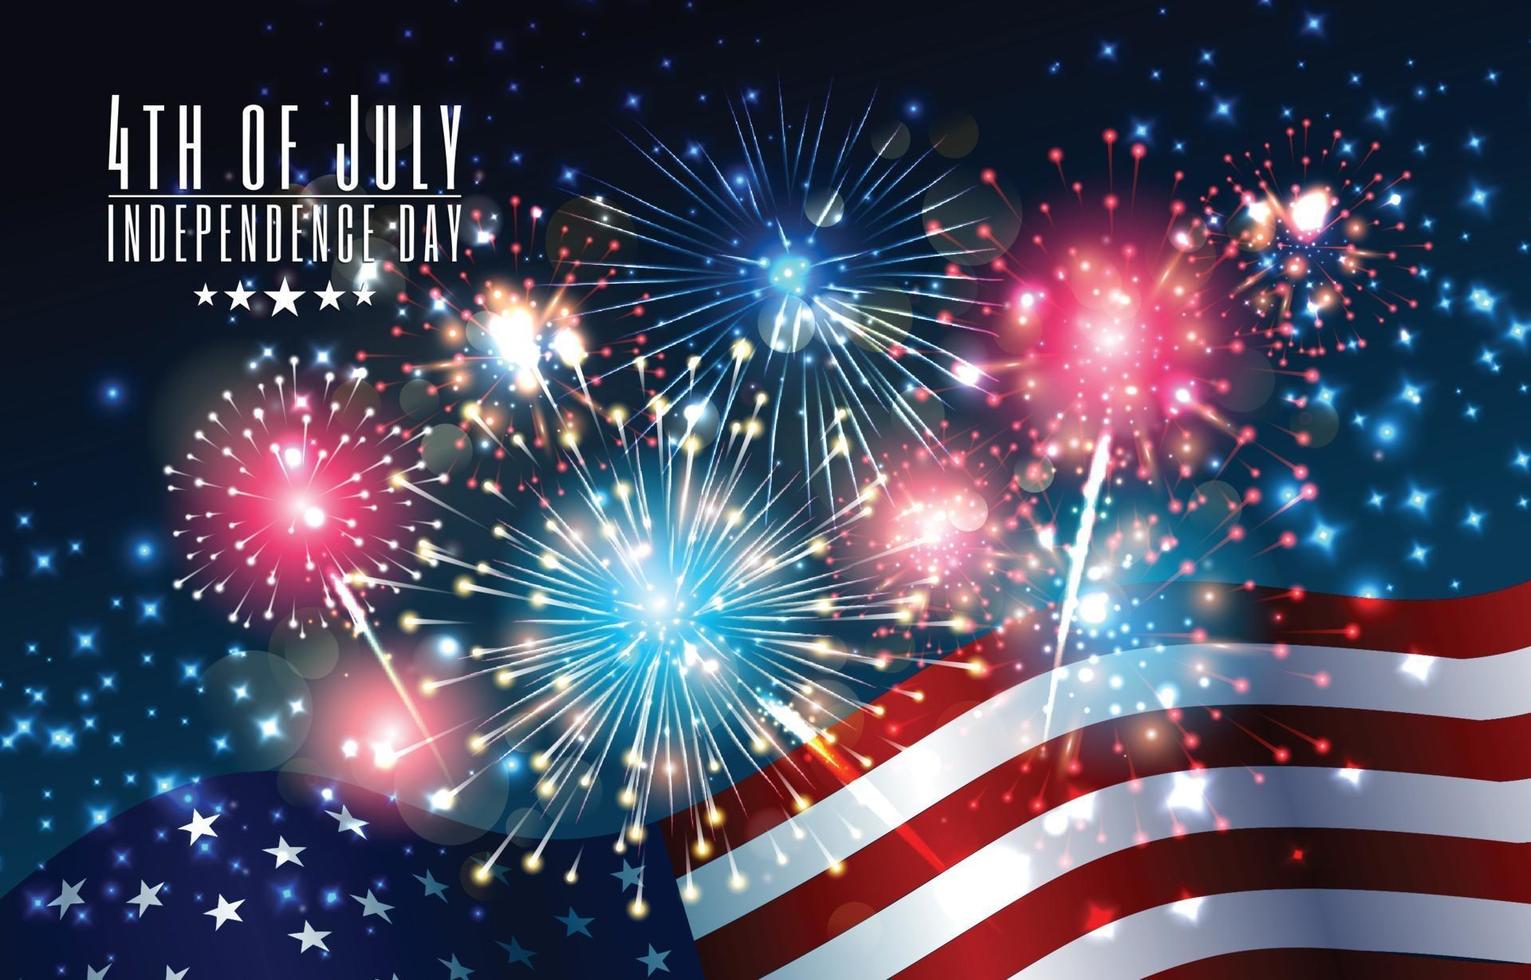 4th of July Independence Day Fireworks and Flag vector